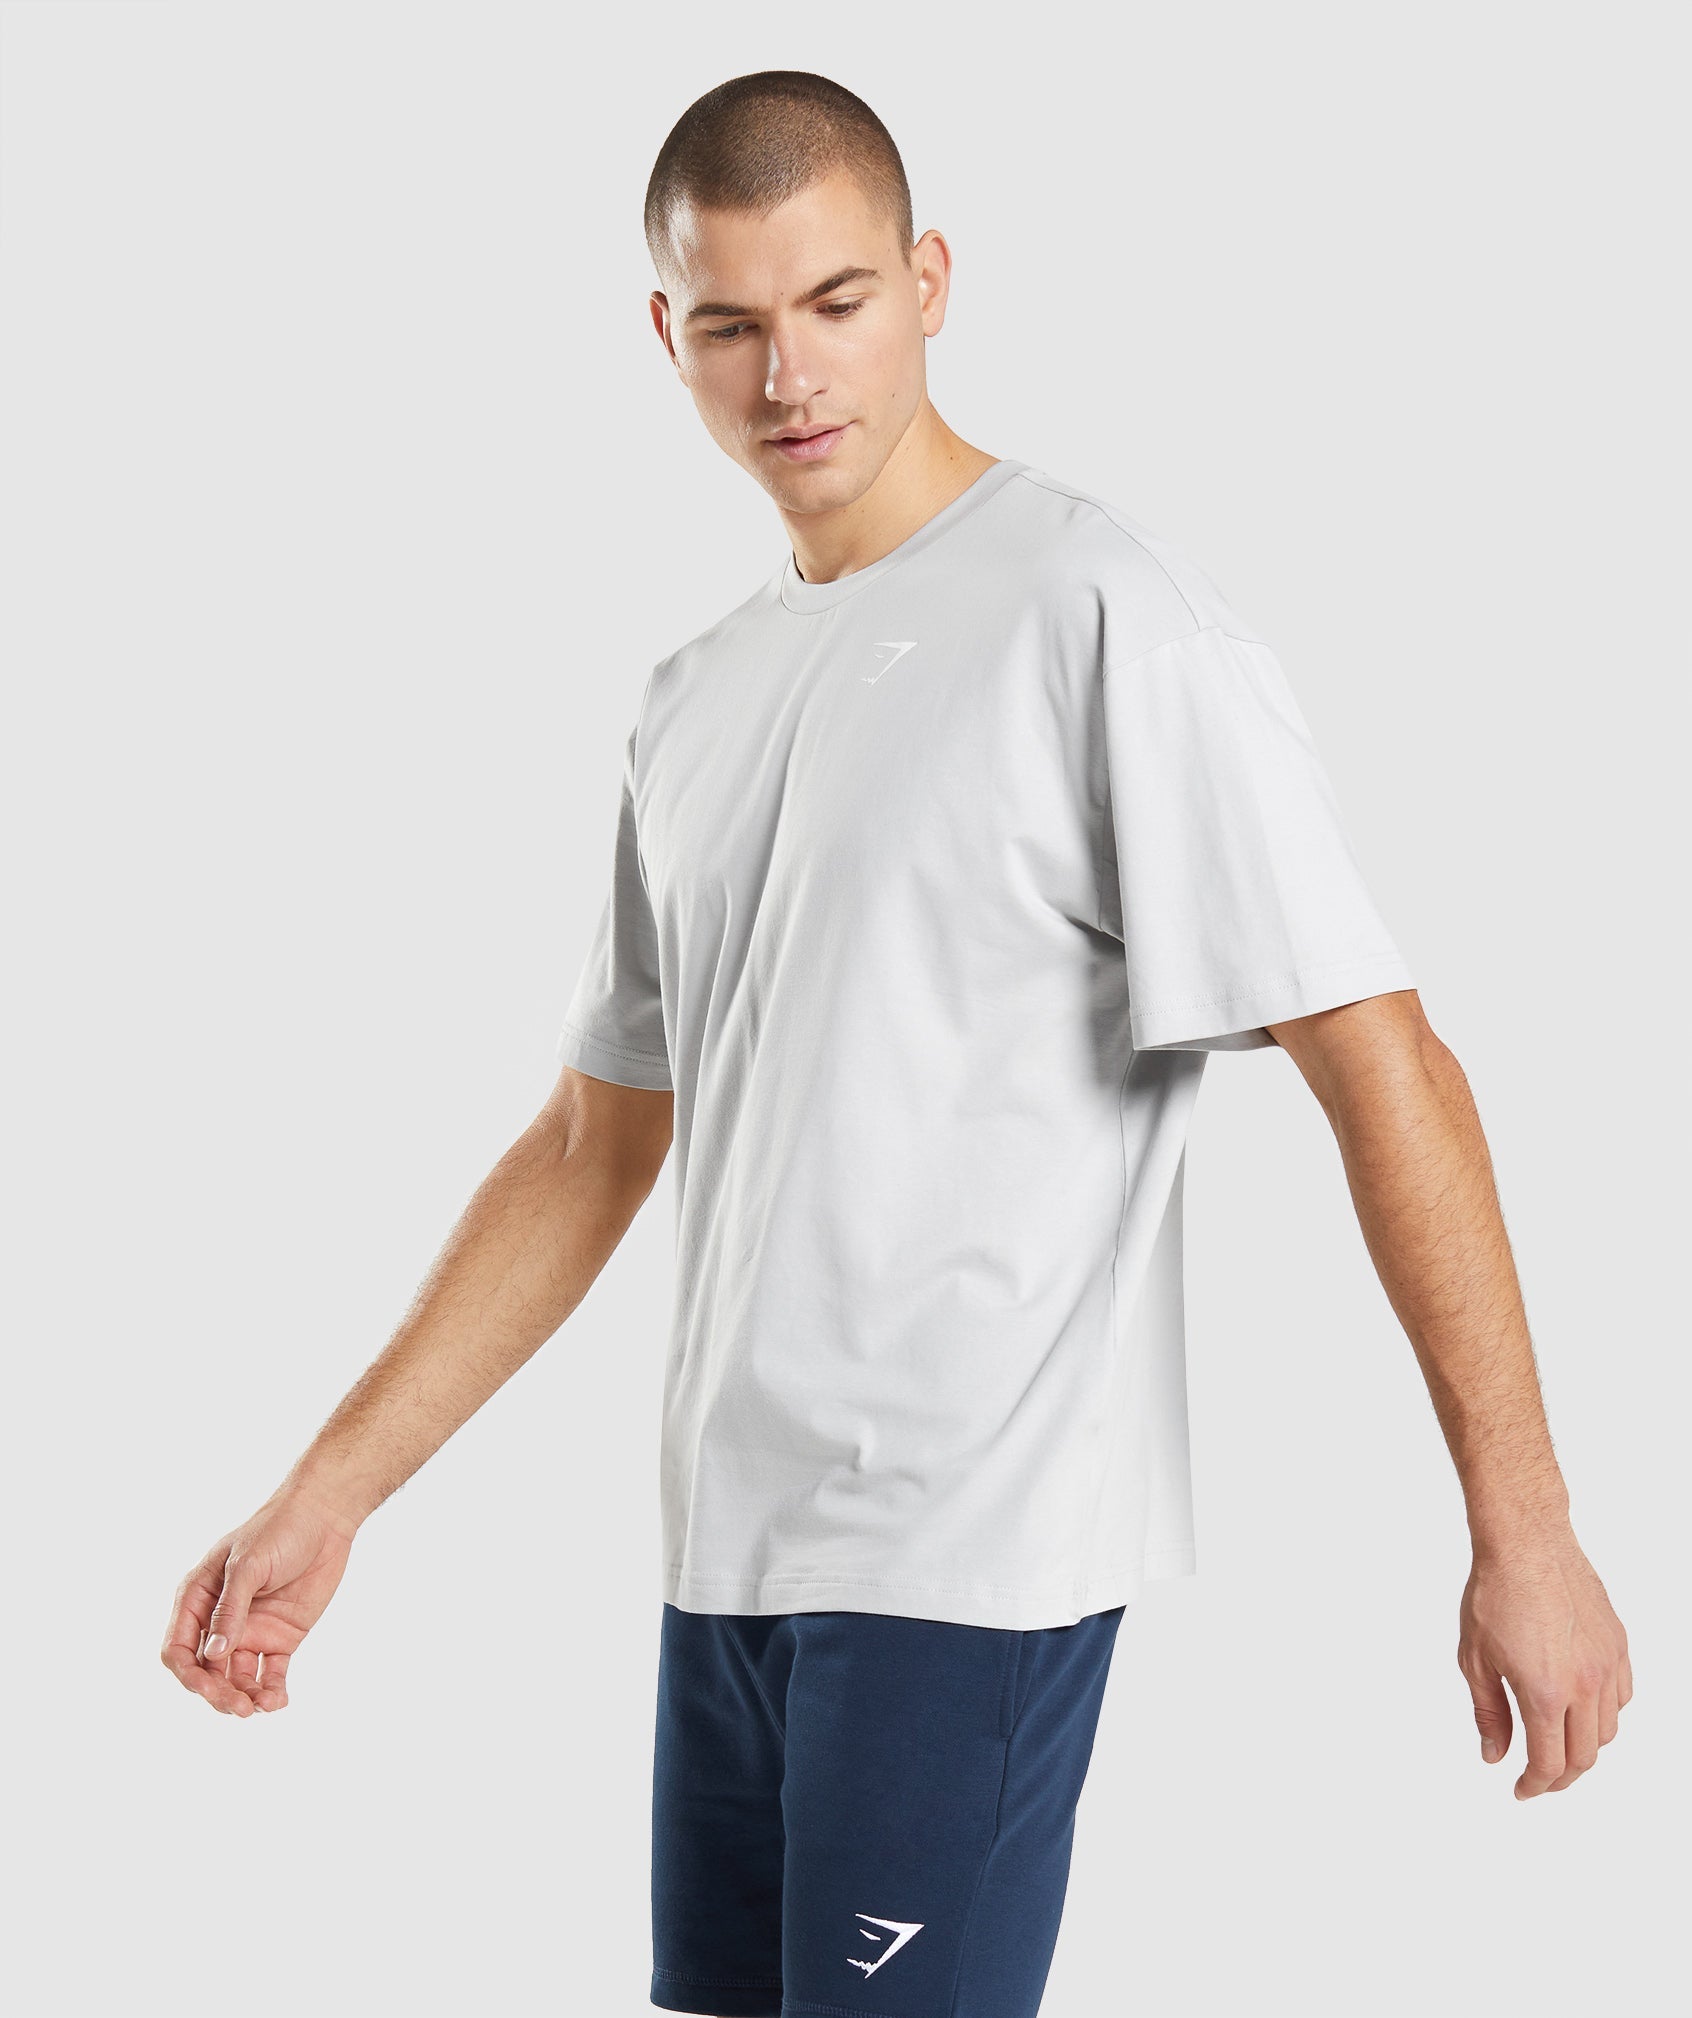 Essential Oversized T-Shirt in Light Grey - view 3